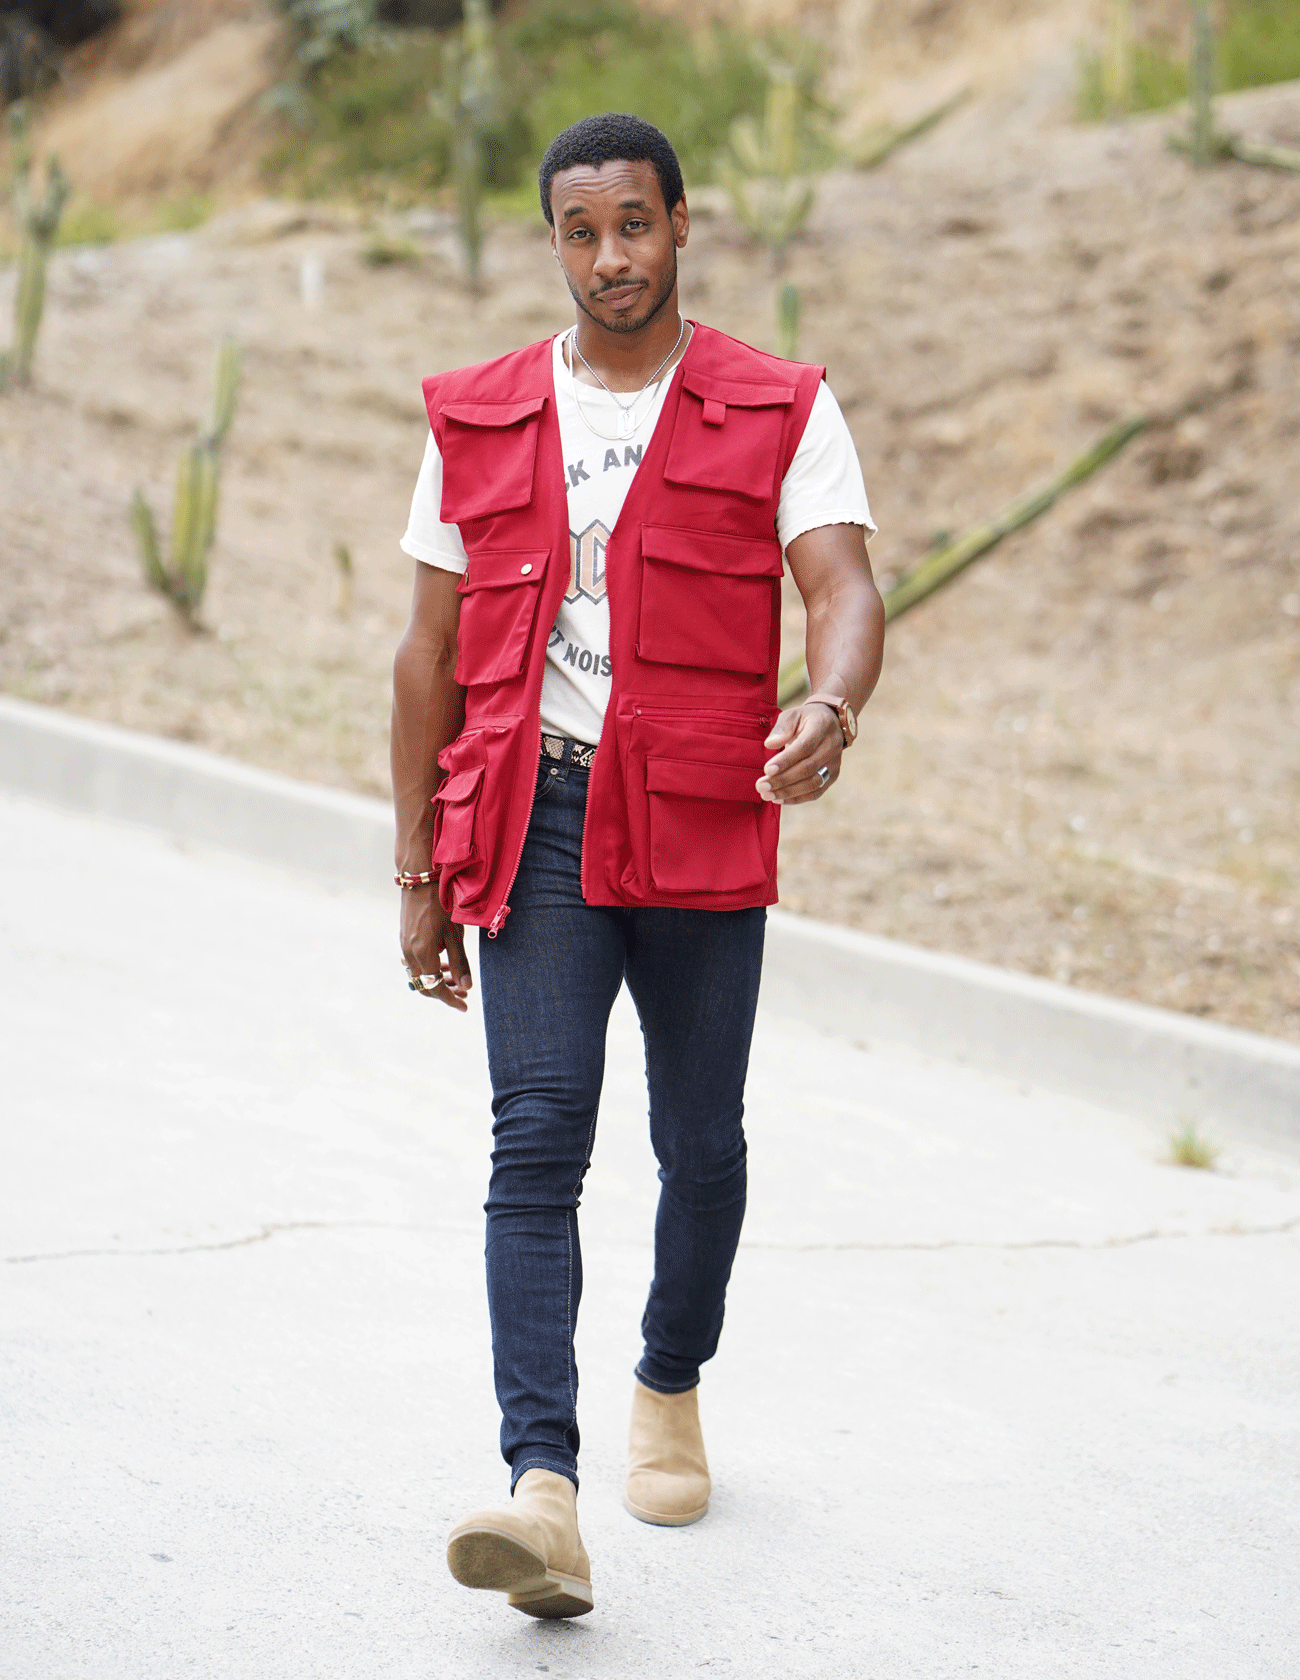 DIY STREET STYLE CARGO VEST CREATED FROM A T-SHIRT – Norris Danta Ford